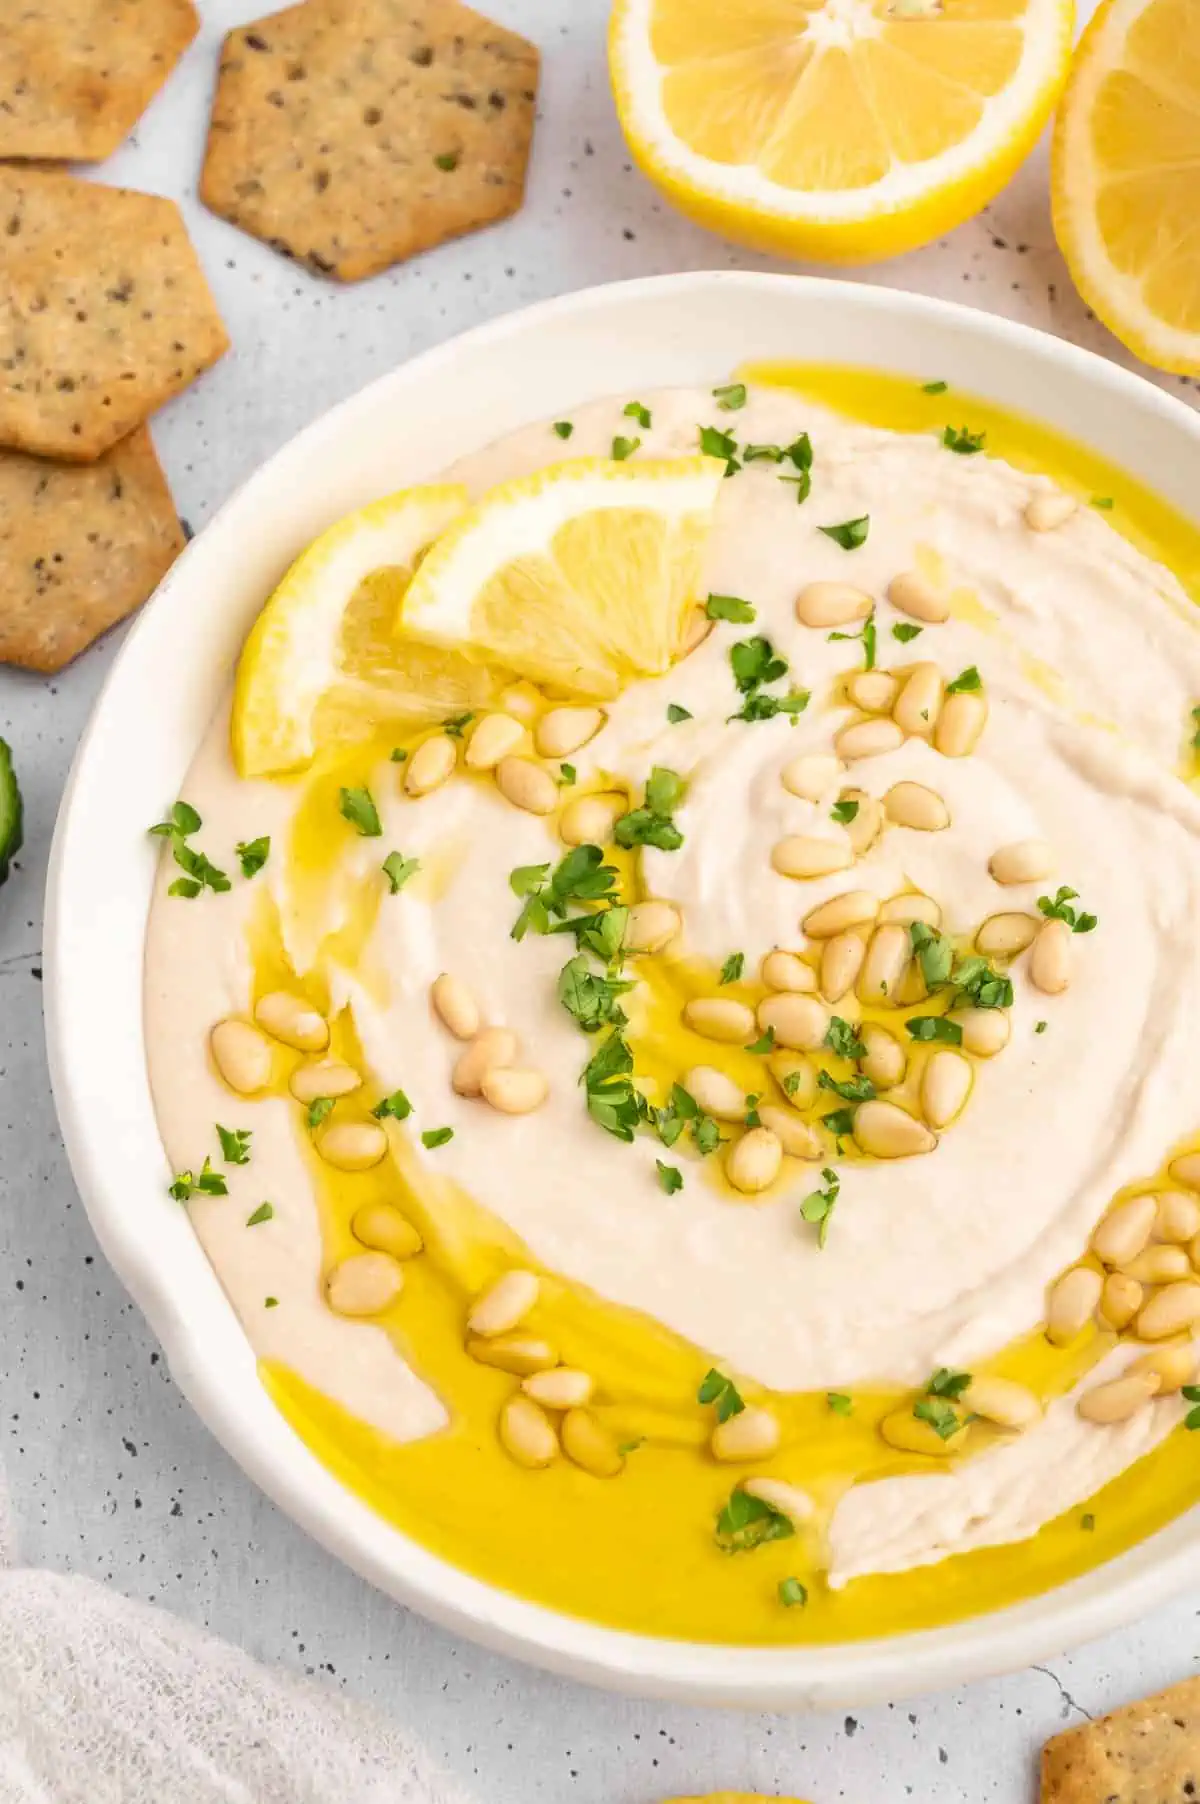 A bowl of white bean hummus dip, garnished with olive oil and pine nuts.